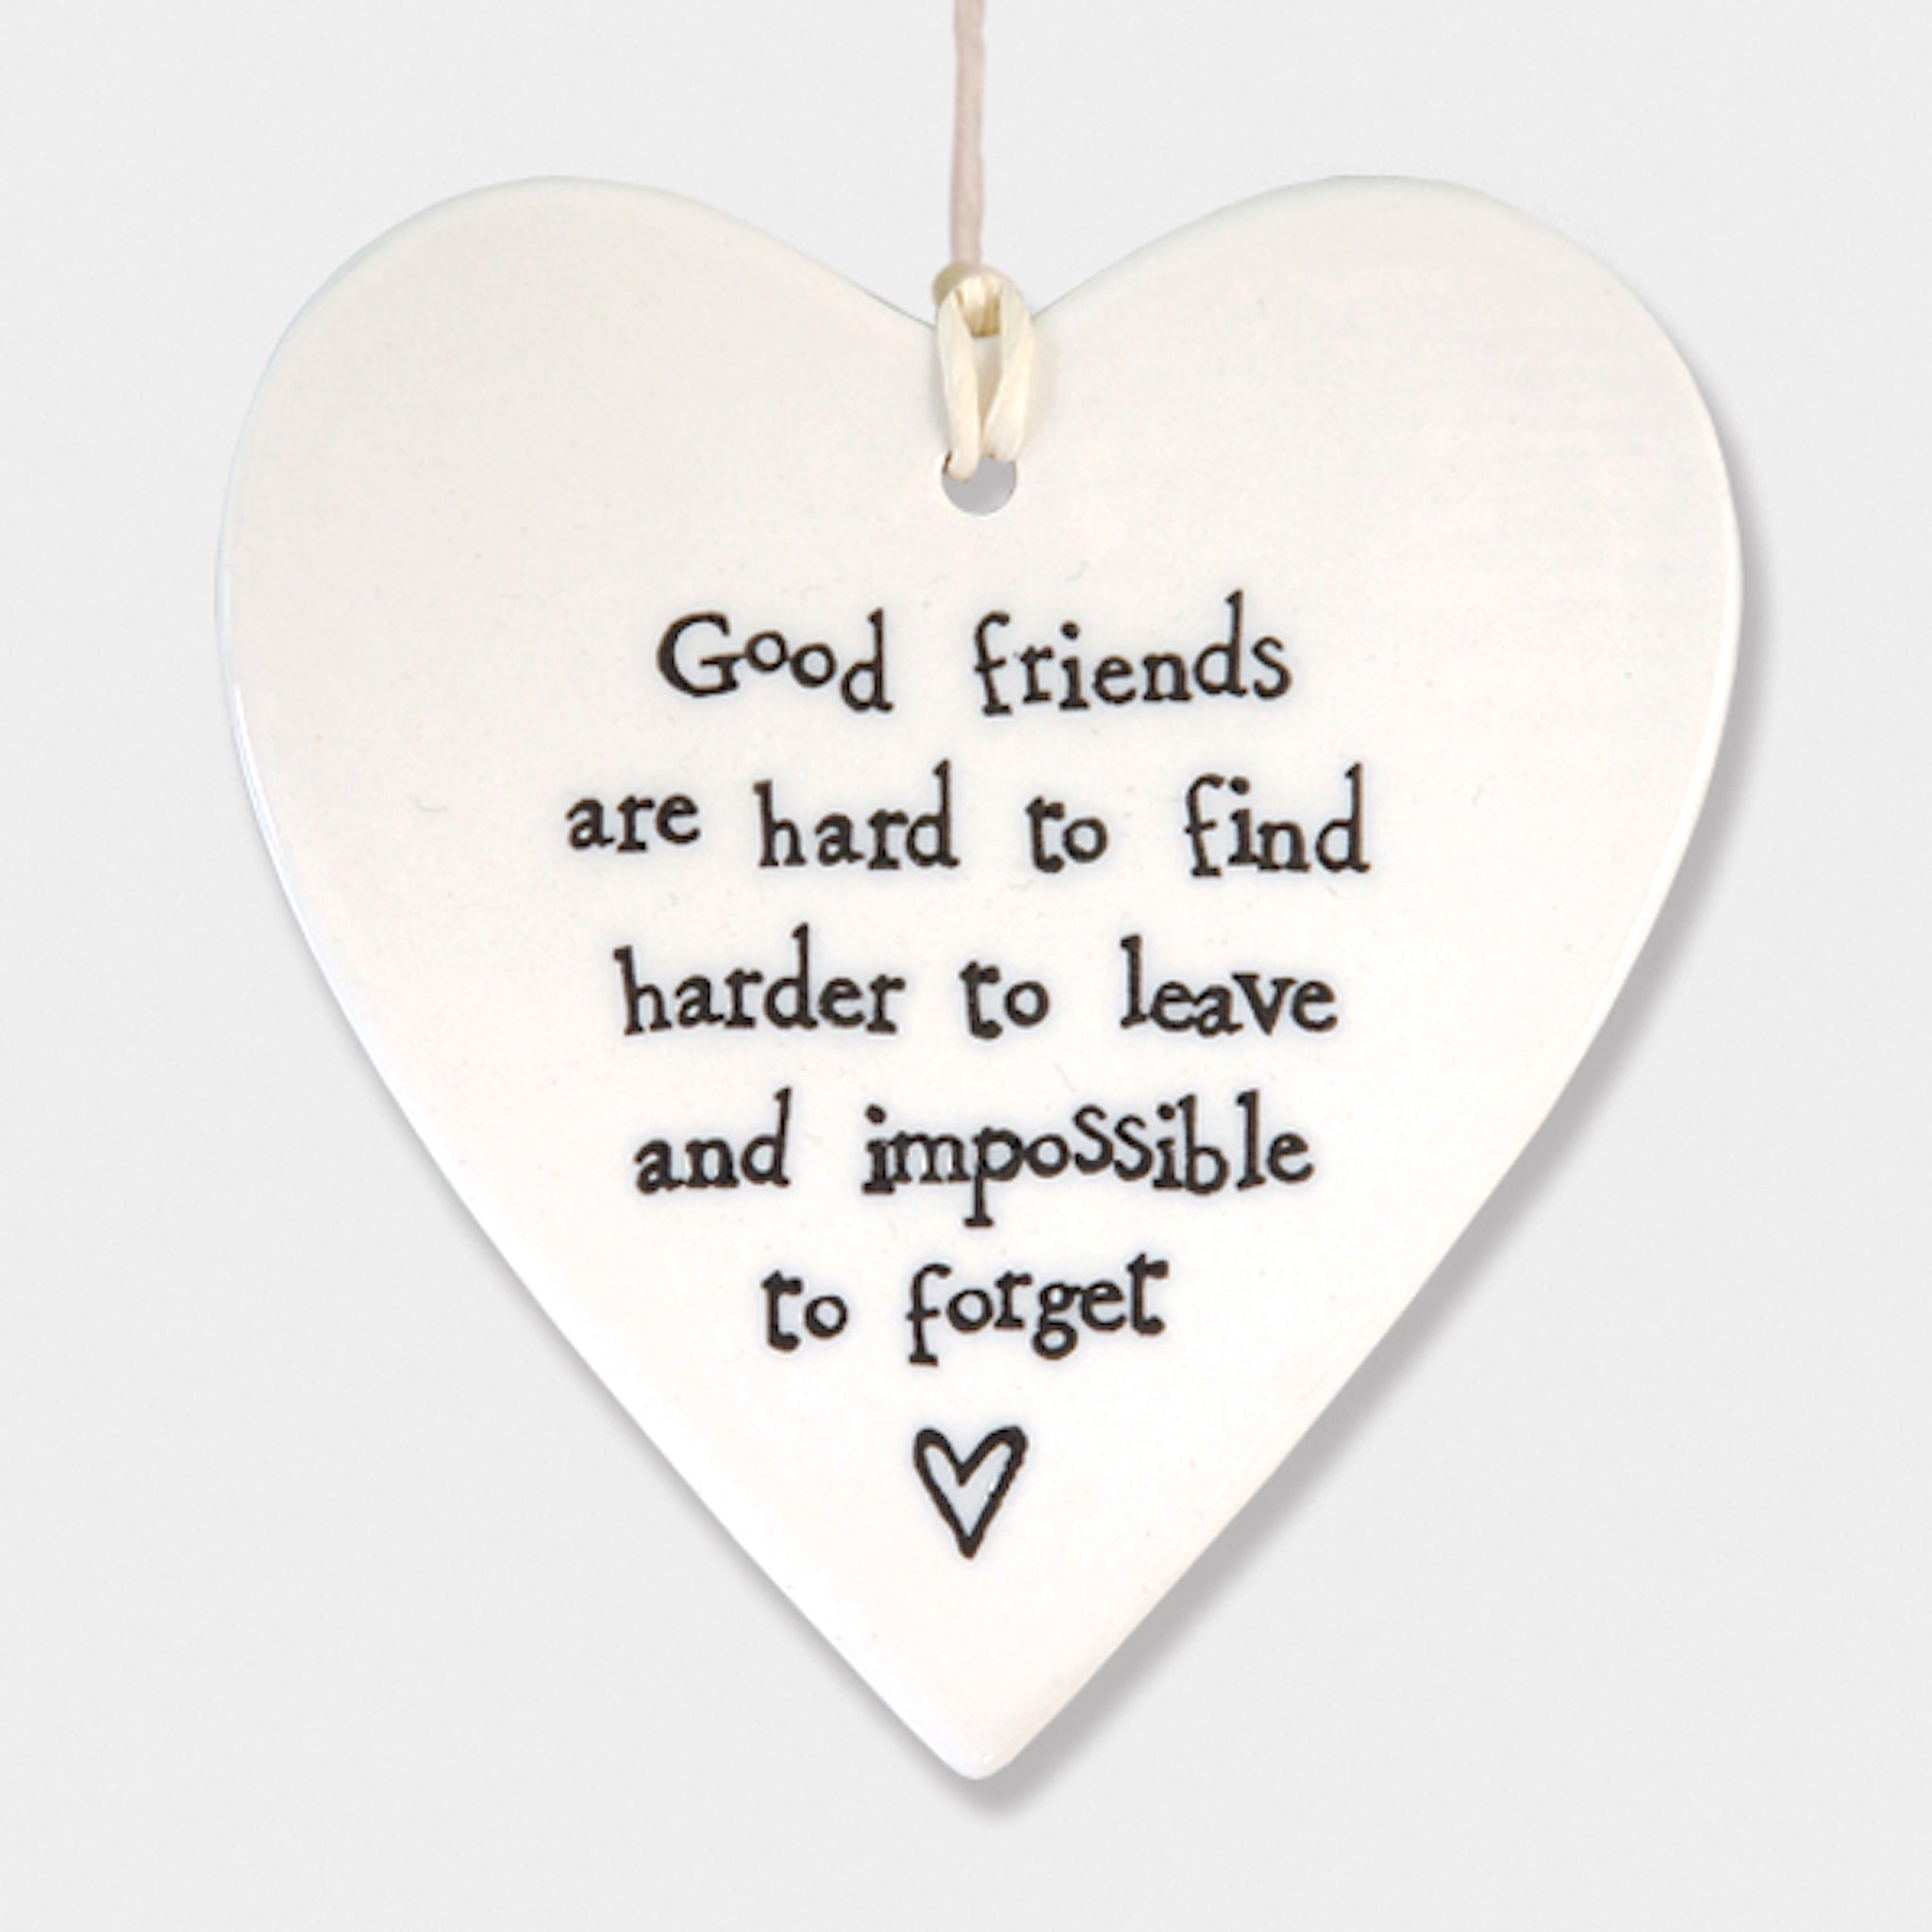 Good friends are hard to find harder to leave and impossible to forget